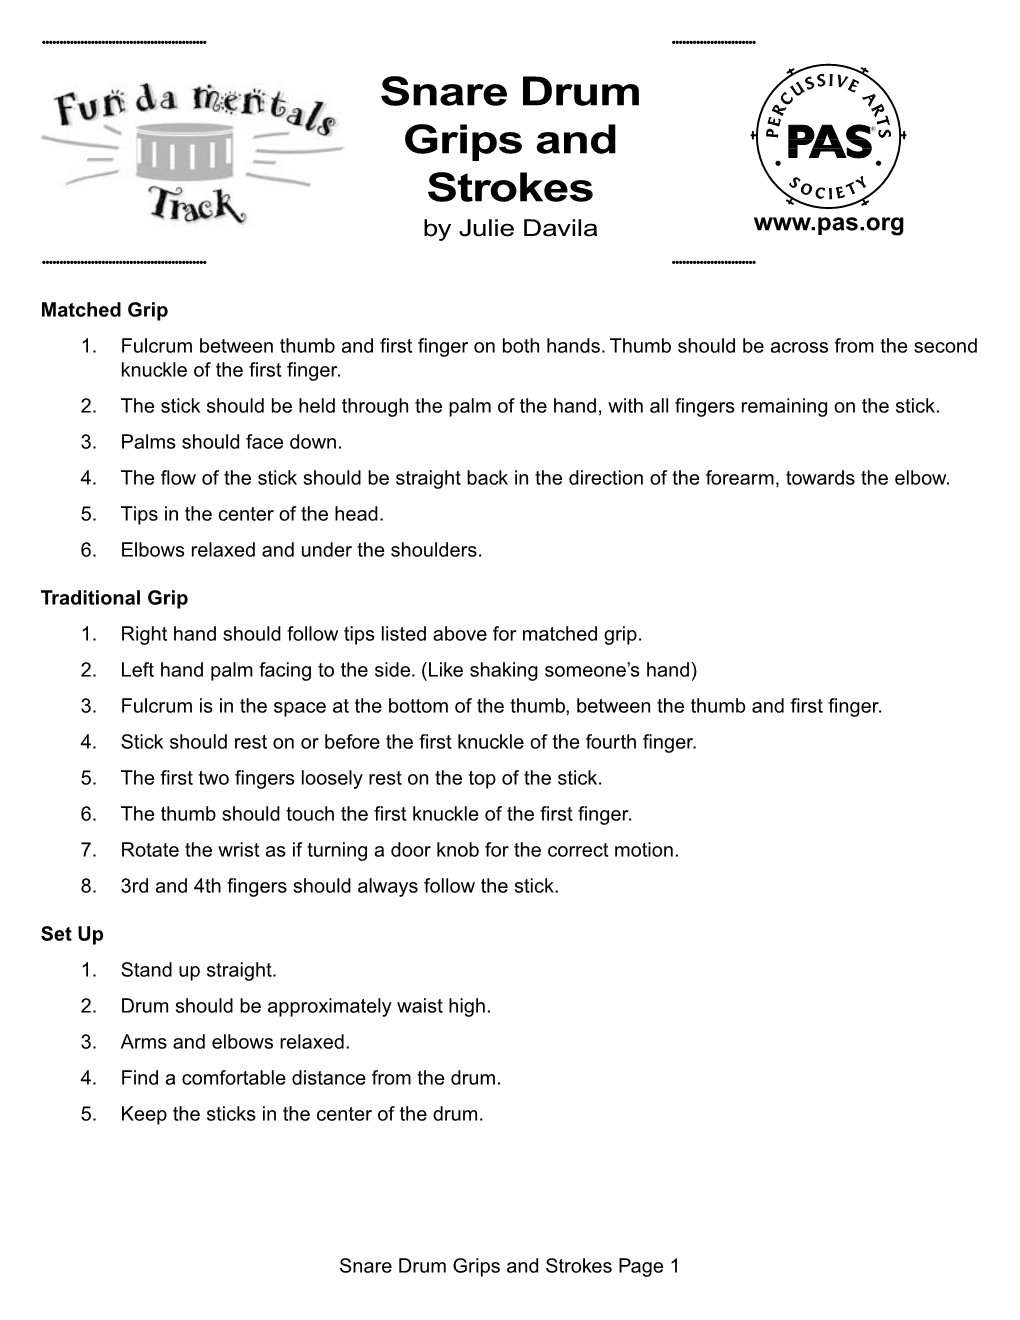 Snare Drum Grips and Strokes Page 1